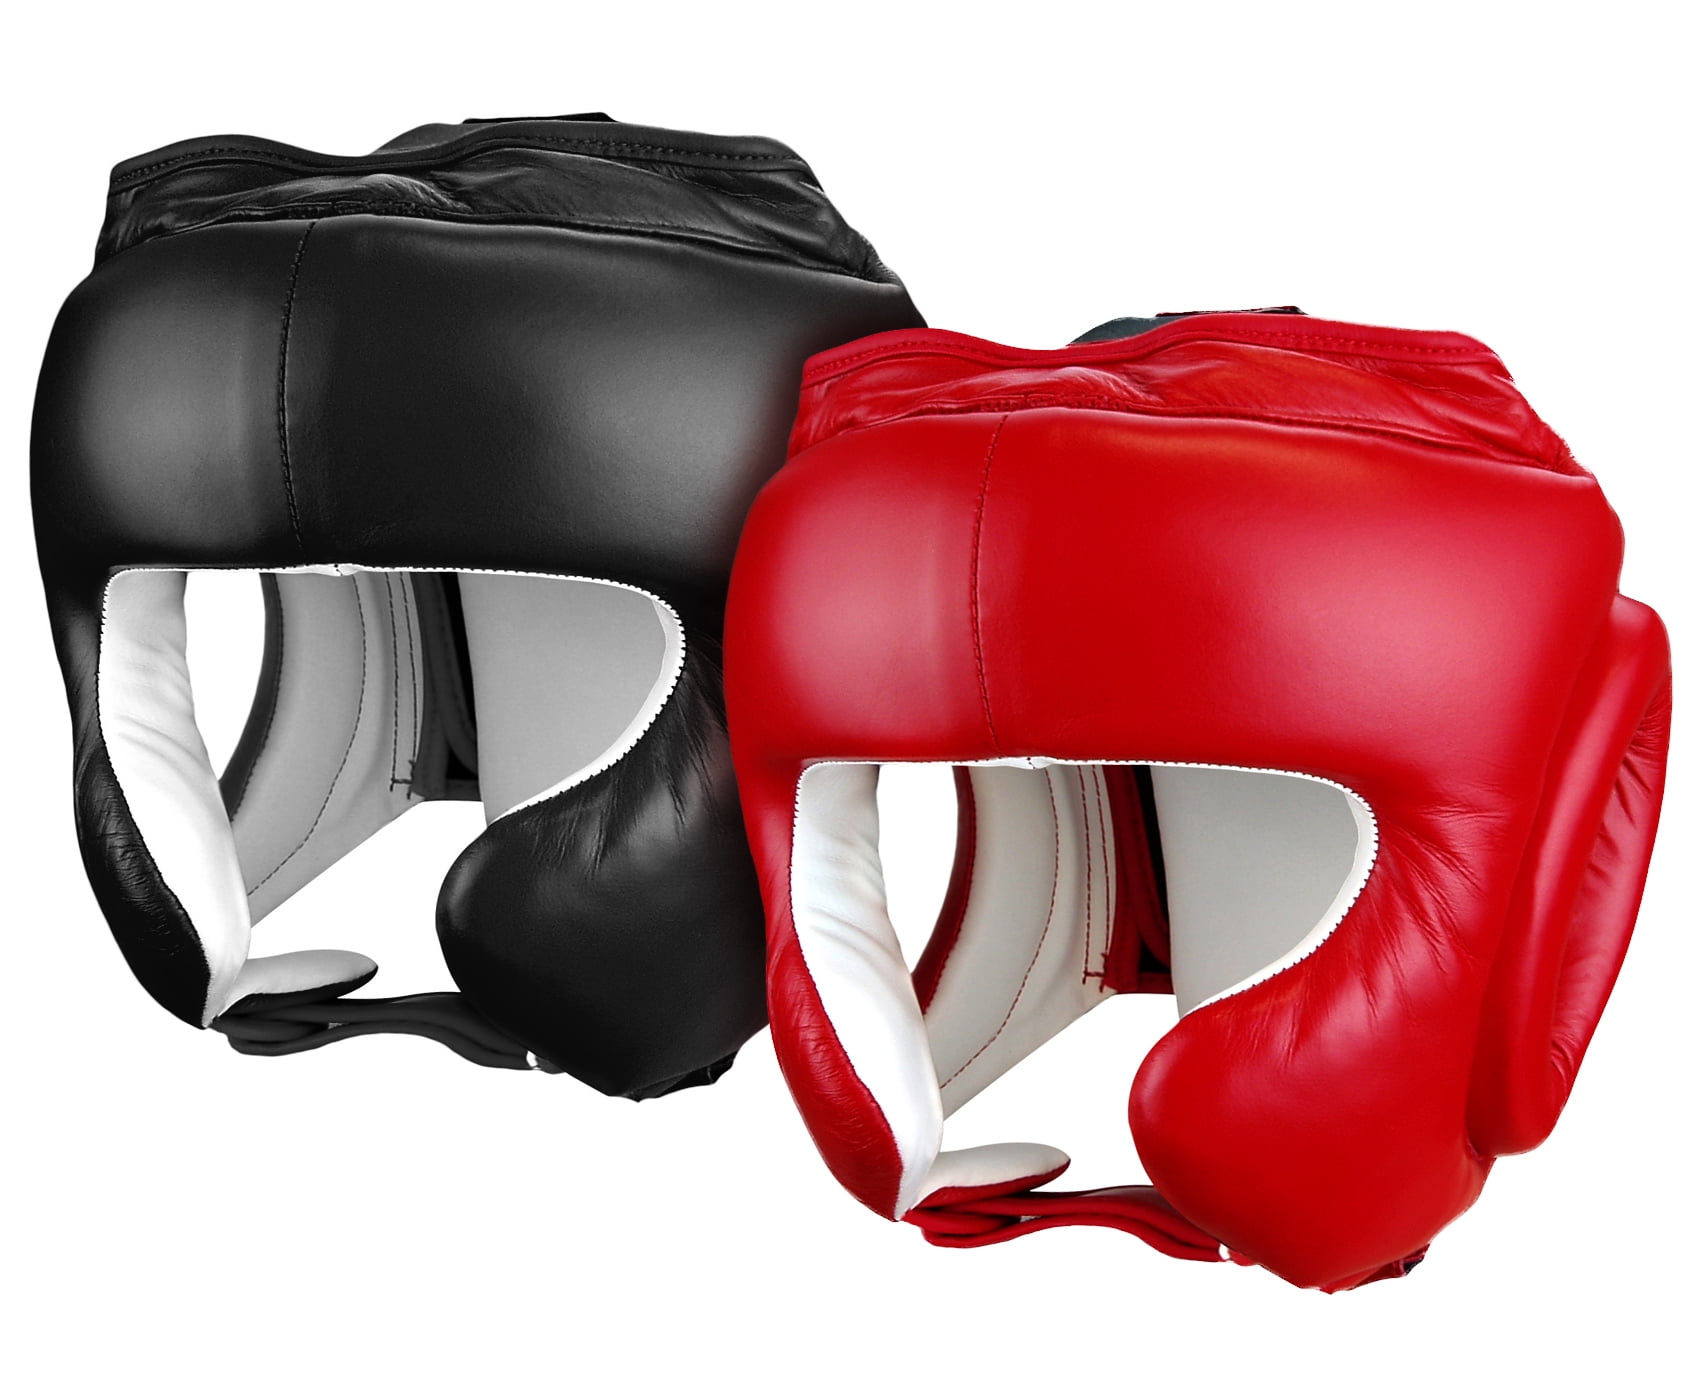 Details about   NEW RINGSIDE SPARRING BOXING FULL PROTECTION HEADGEAR FACE SAVER DFSH RED/WHITE 